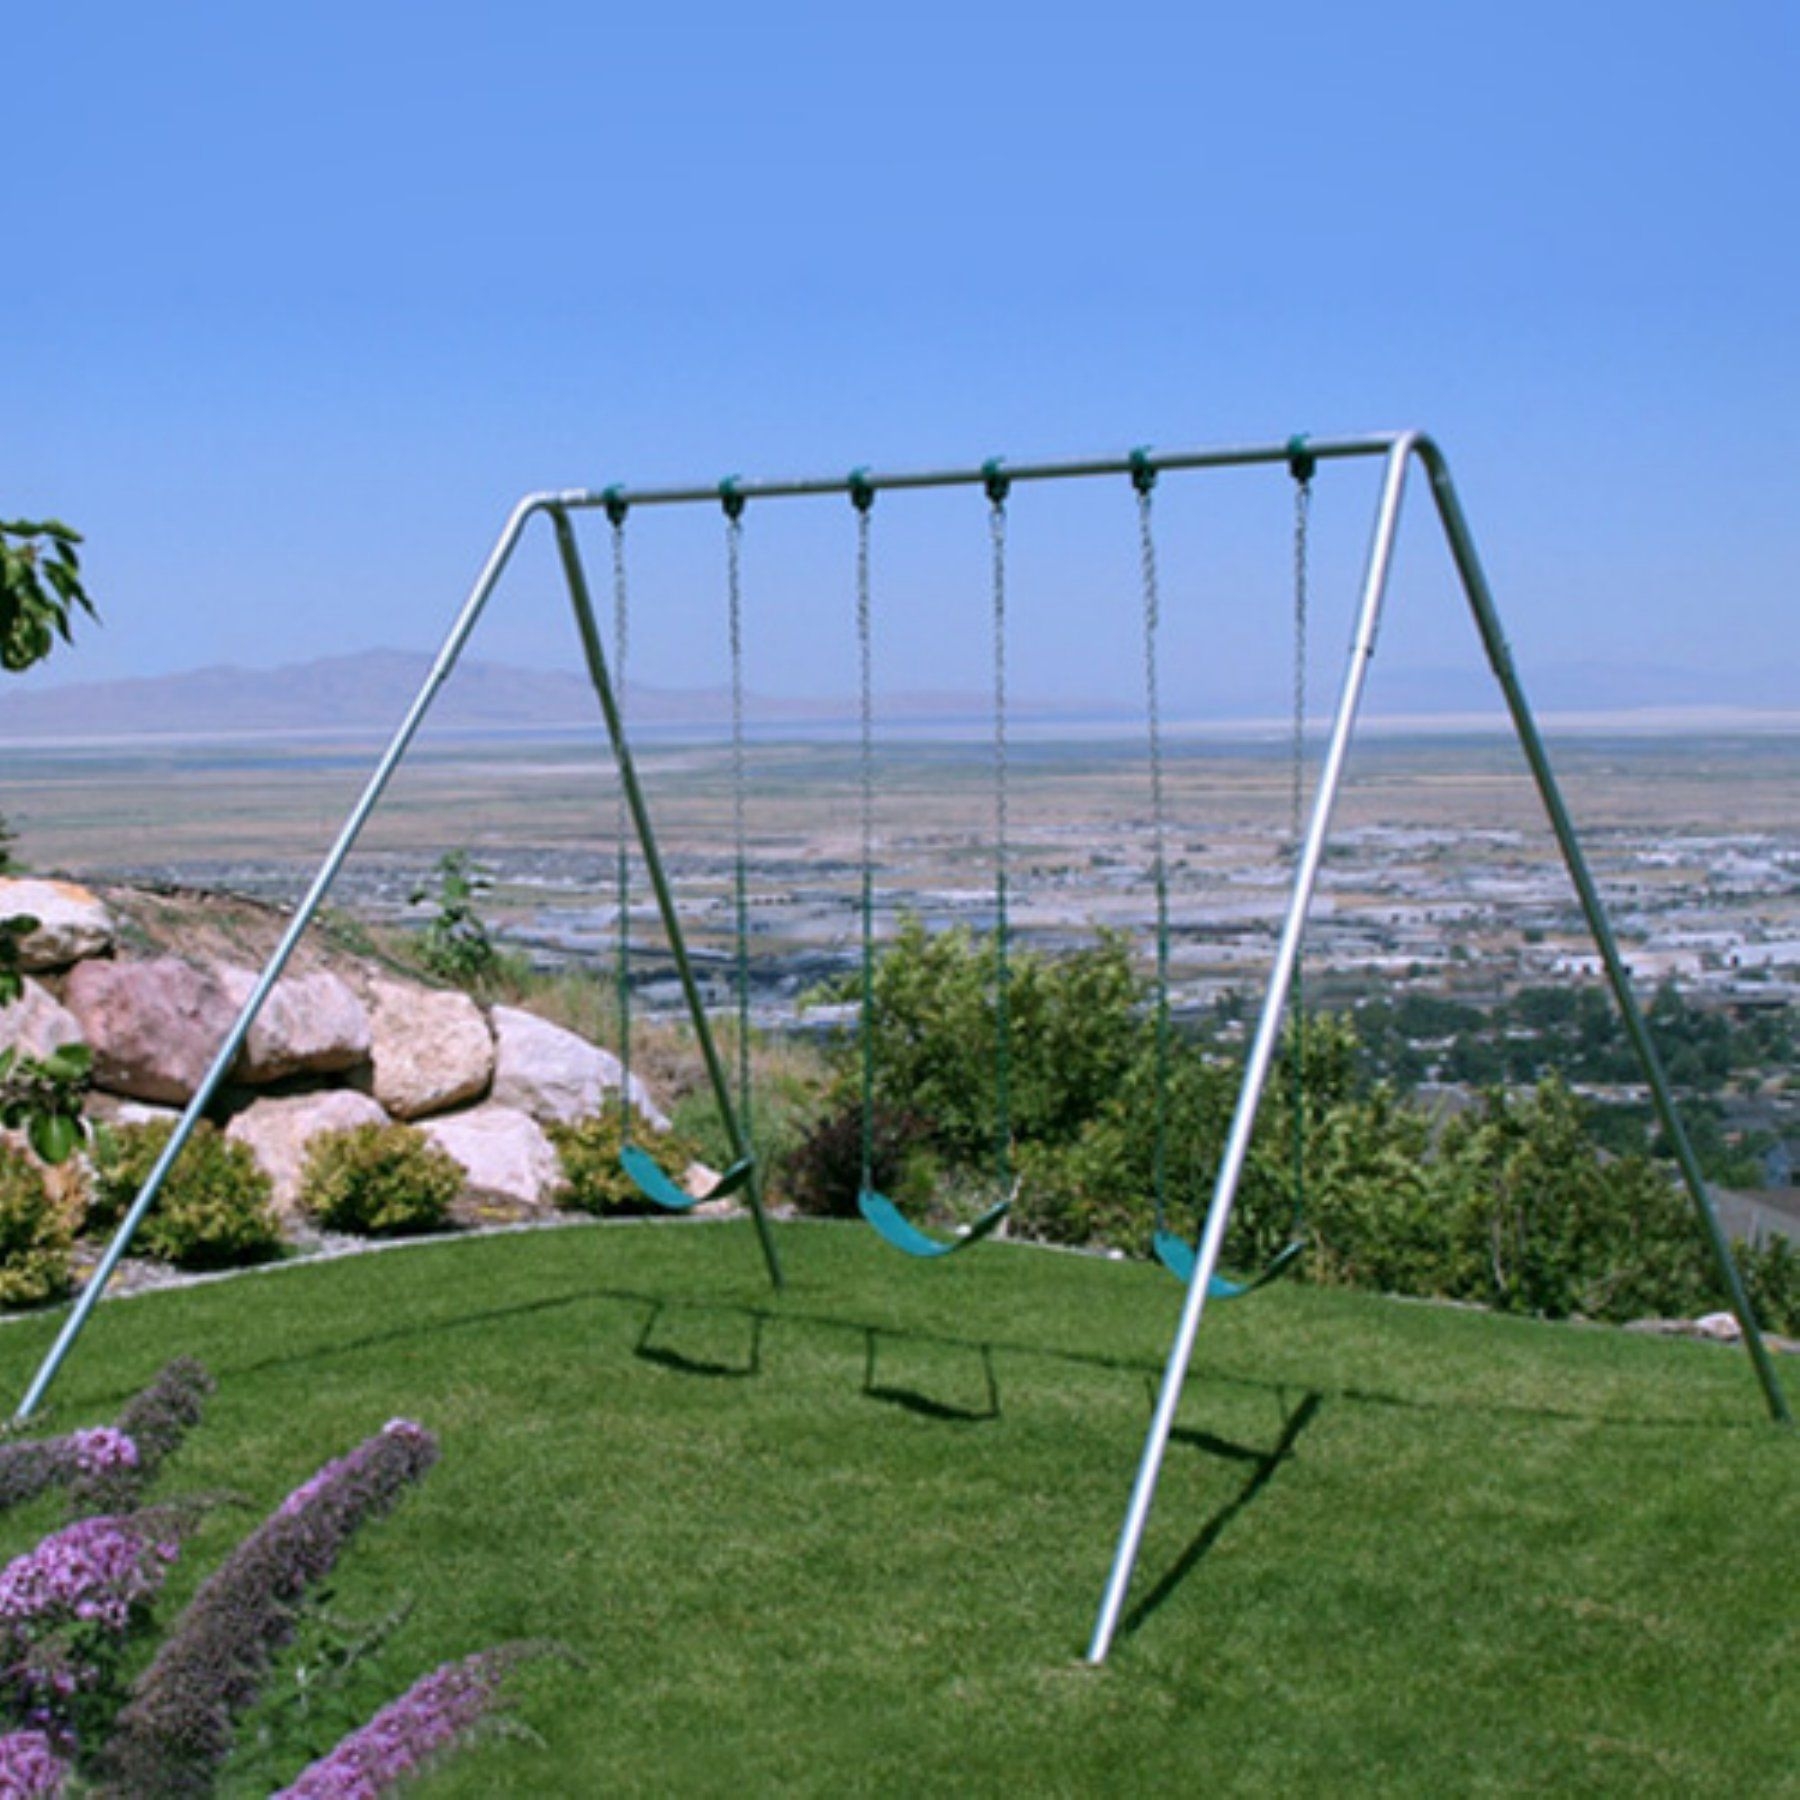 Component playgrounds charley metal swing set